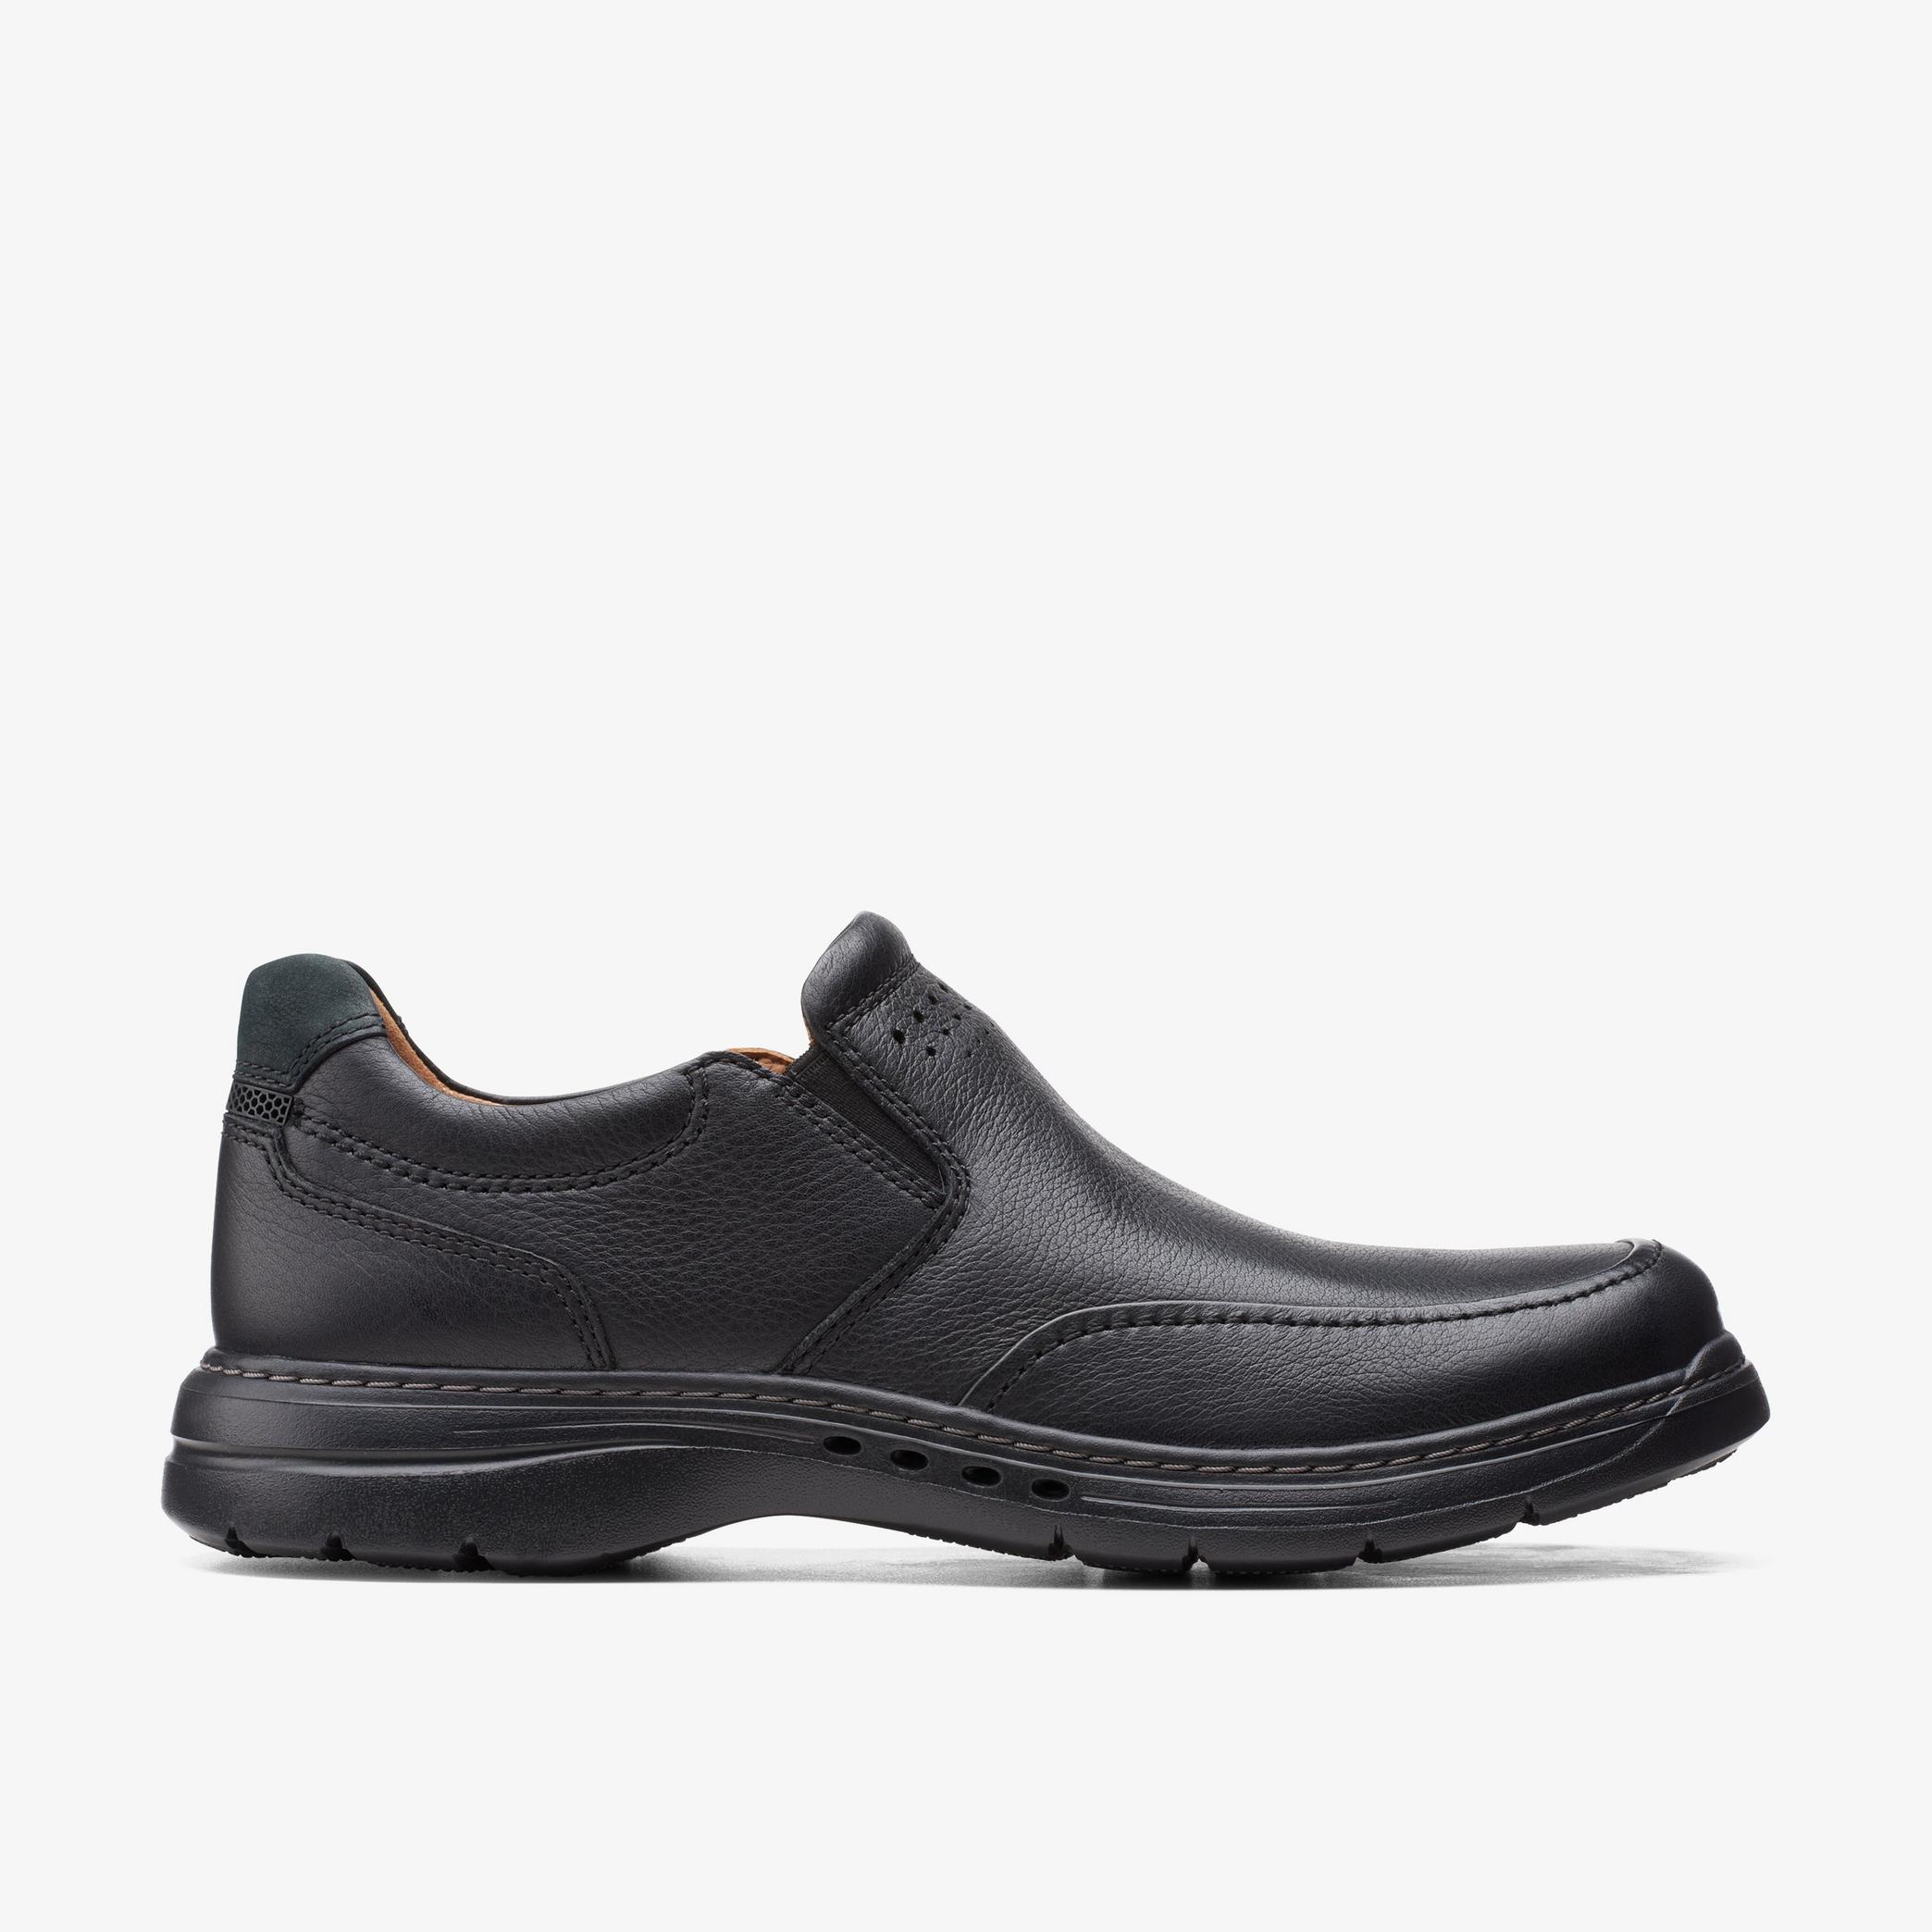 MENS Un Brawley Step Black Leather Loafers | Clarks US